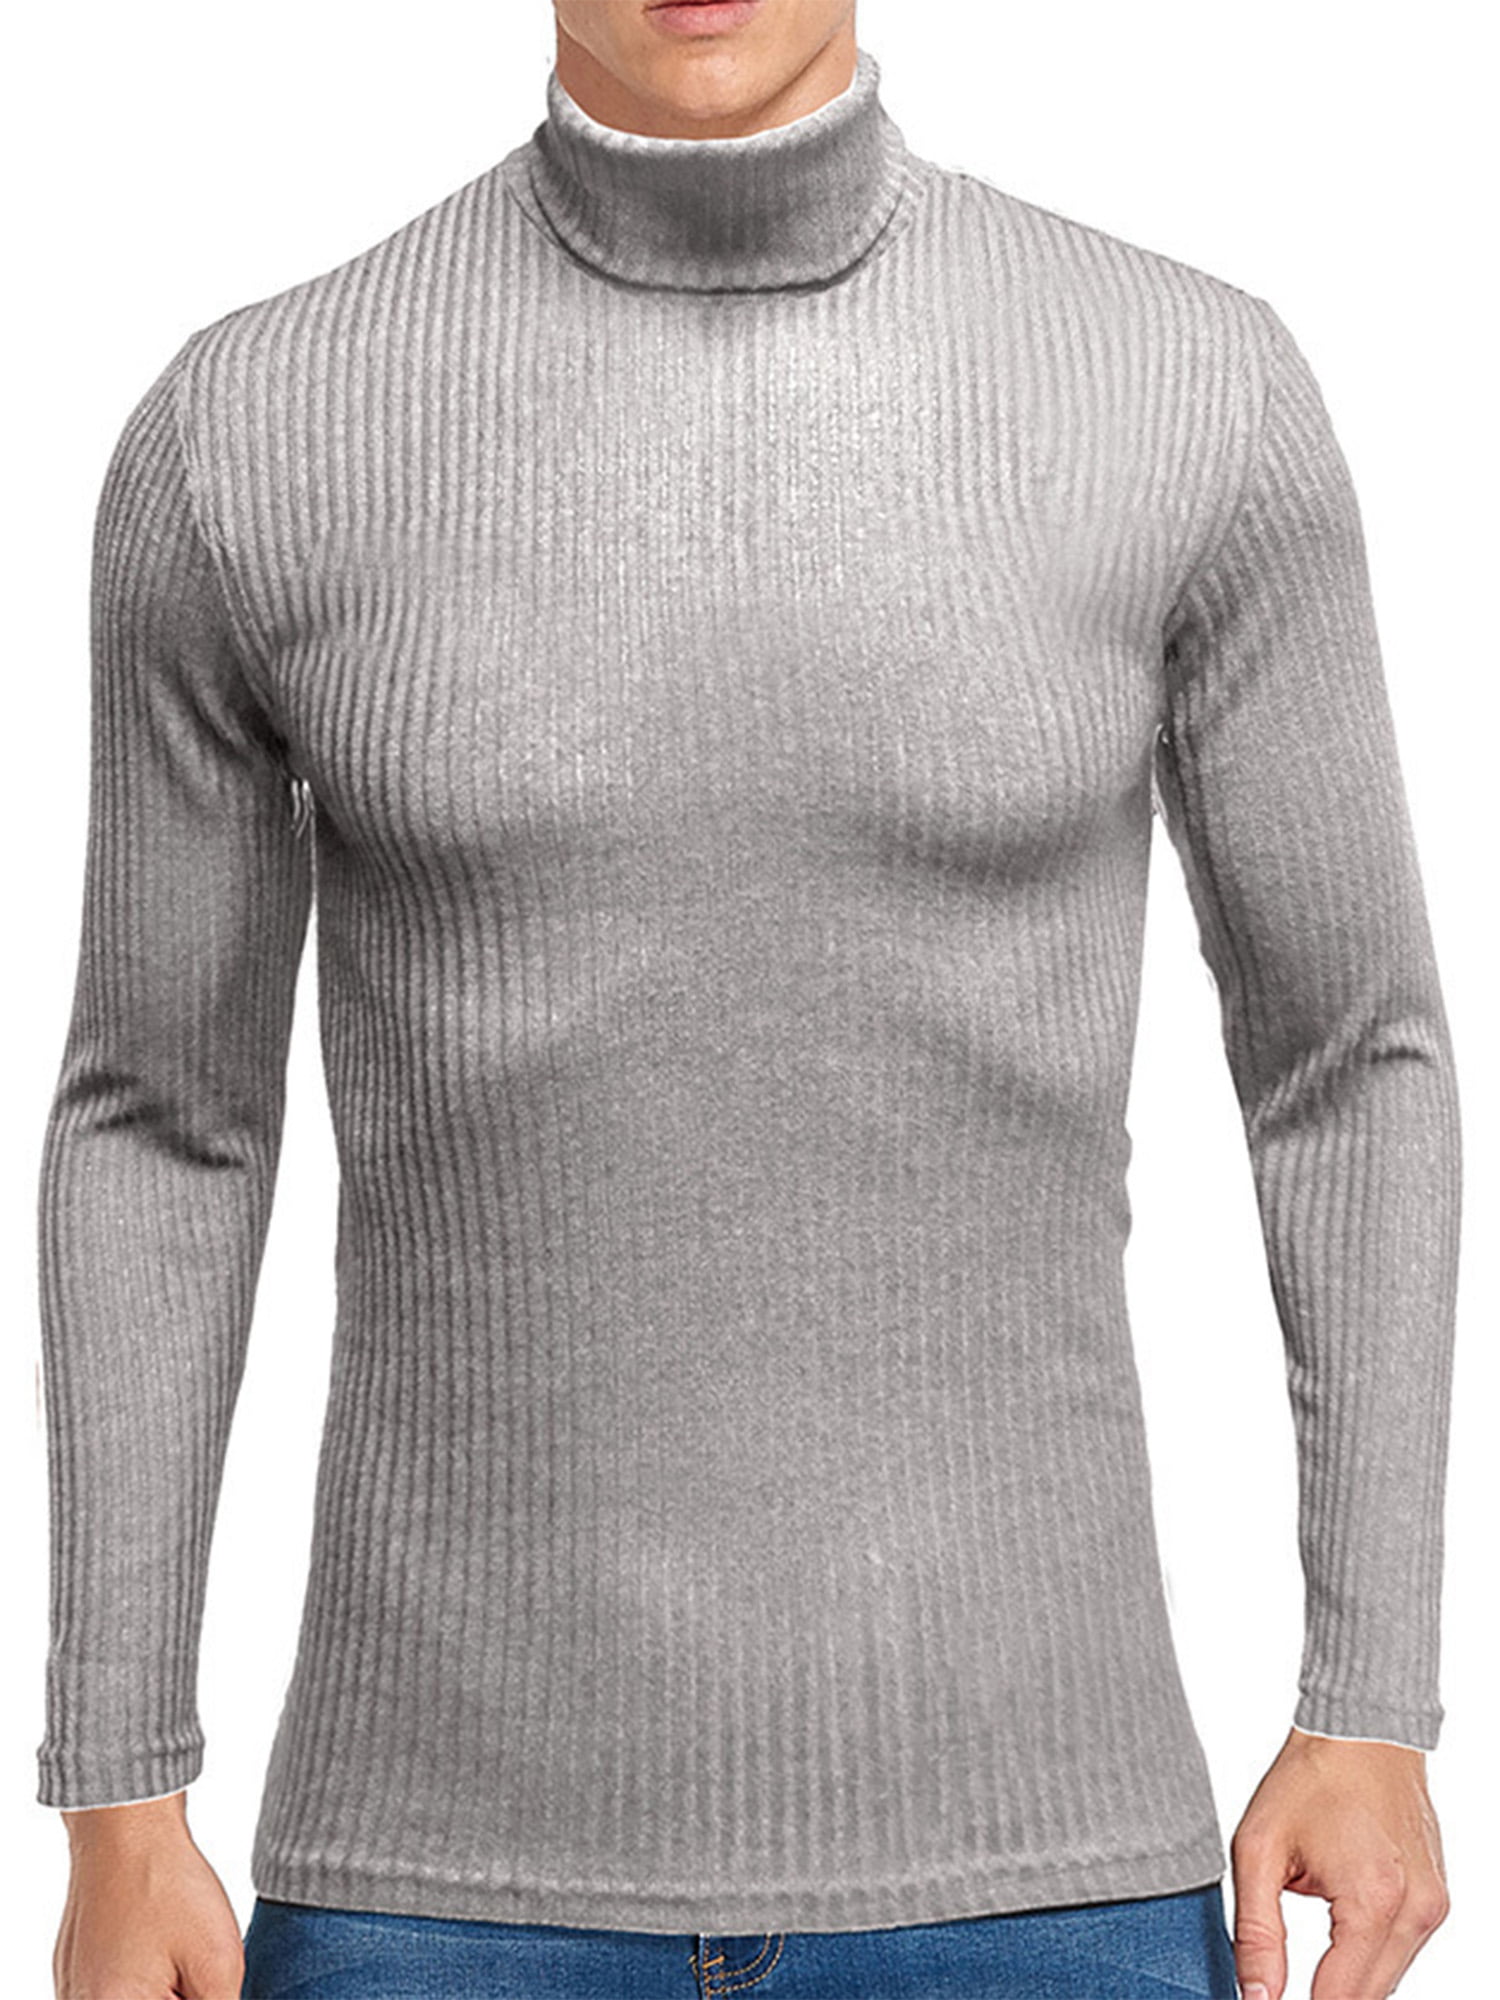 Generic Mens Knitting Thicken Winter Faux Fur Lined Solid Round Neck Pullover Sweaters